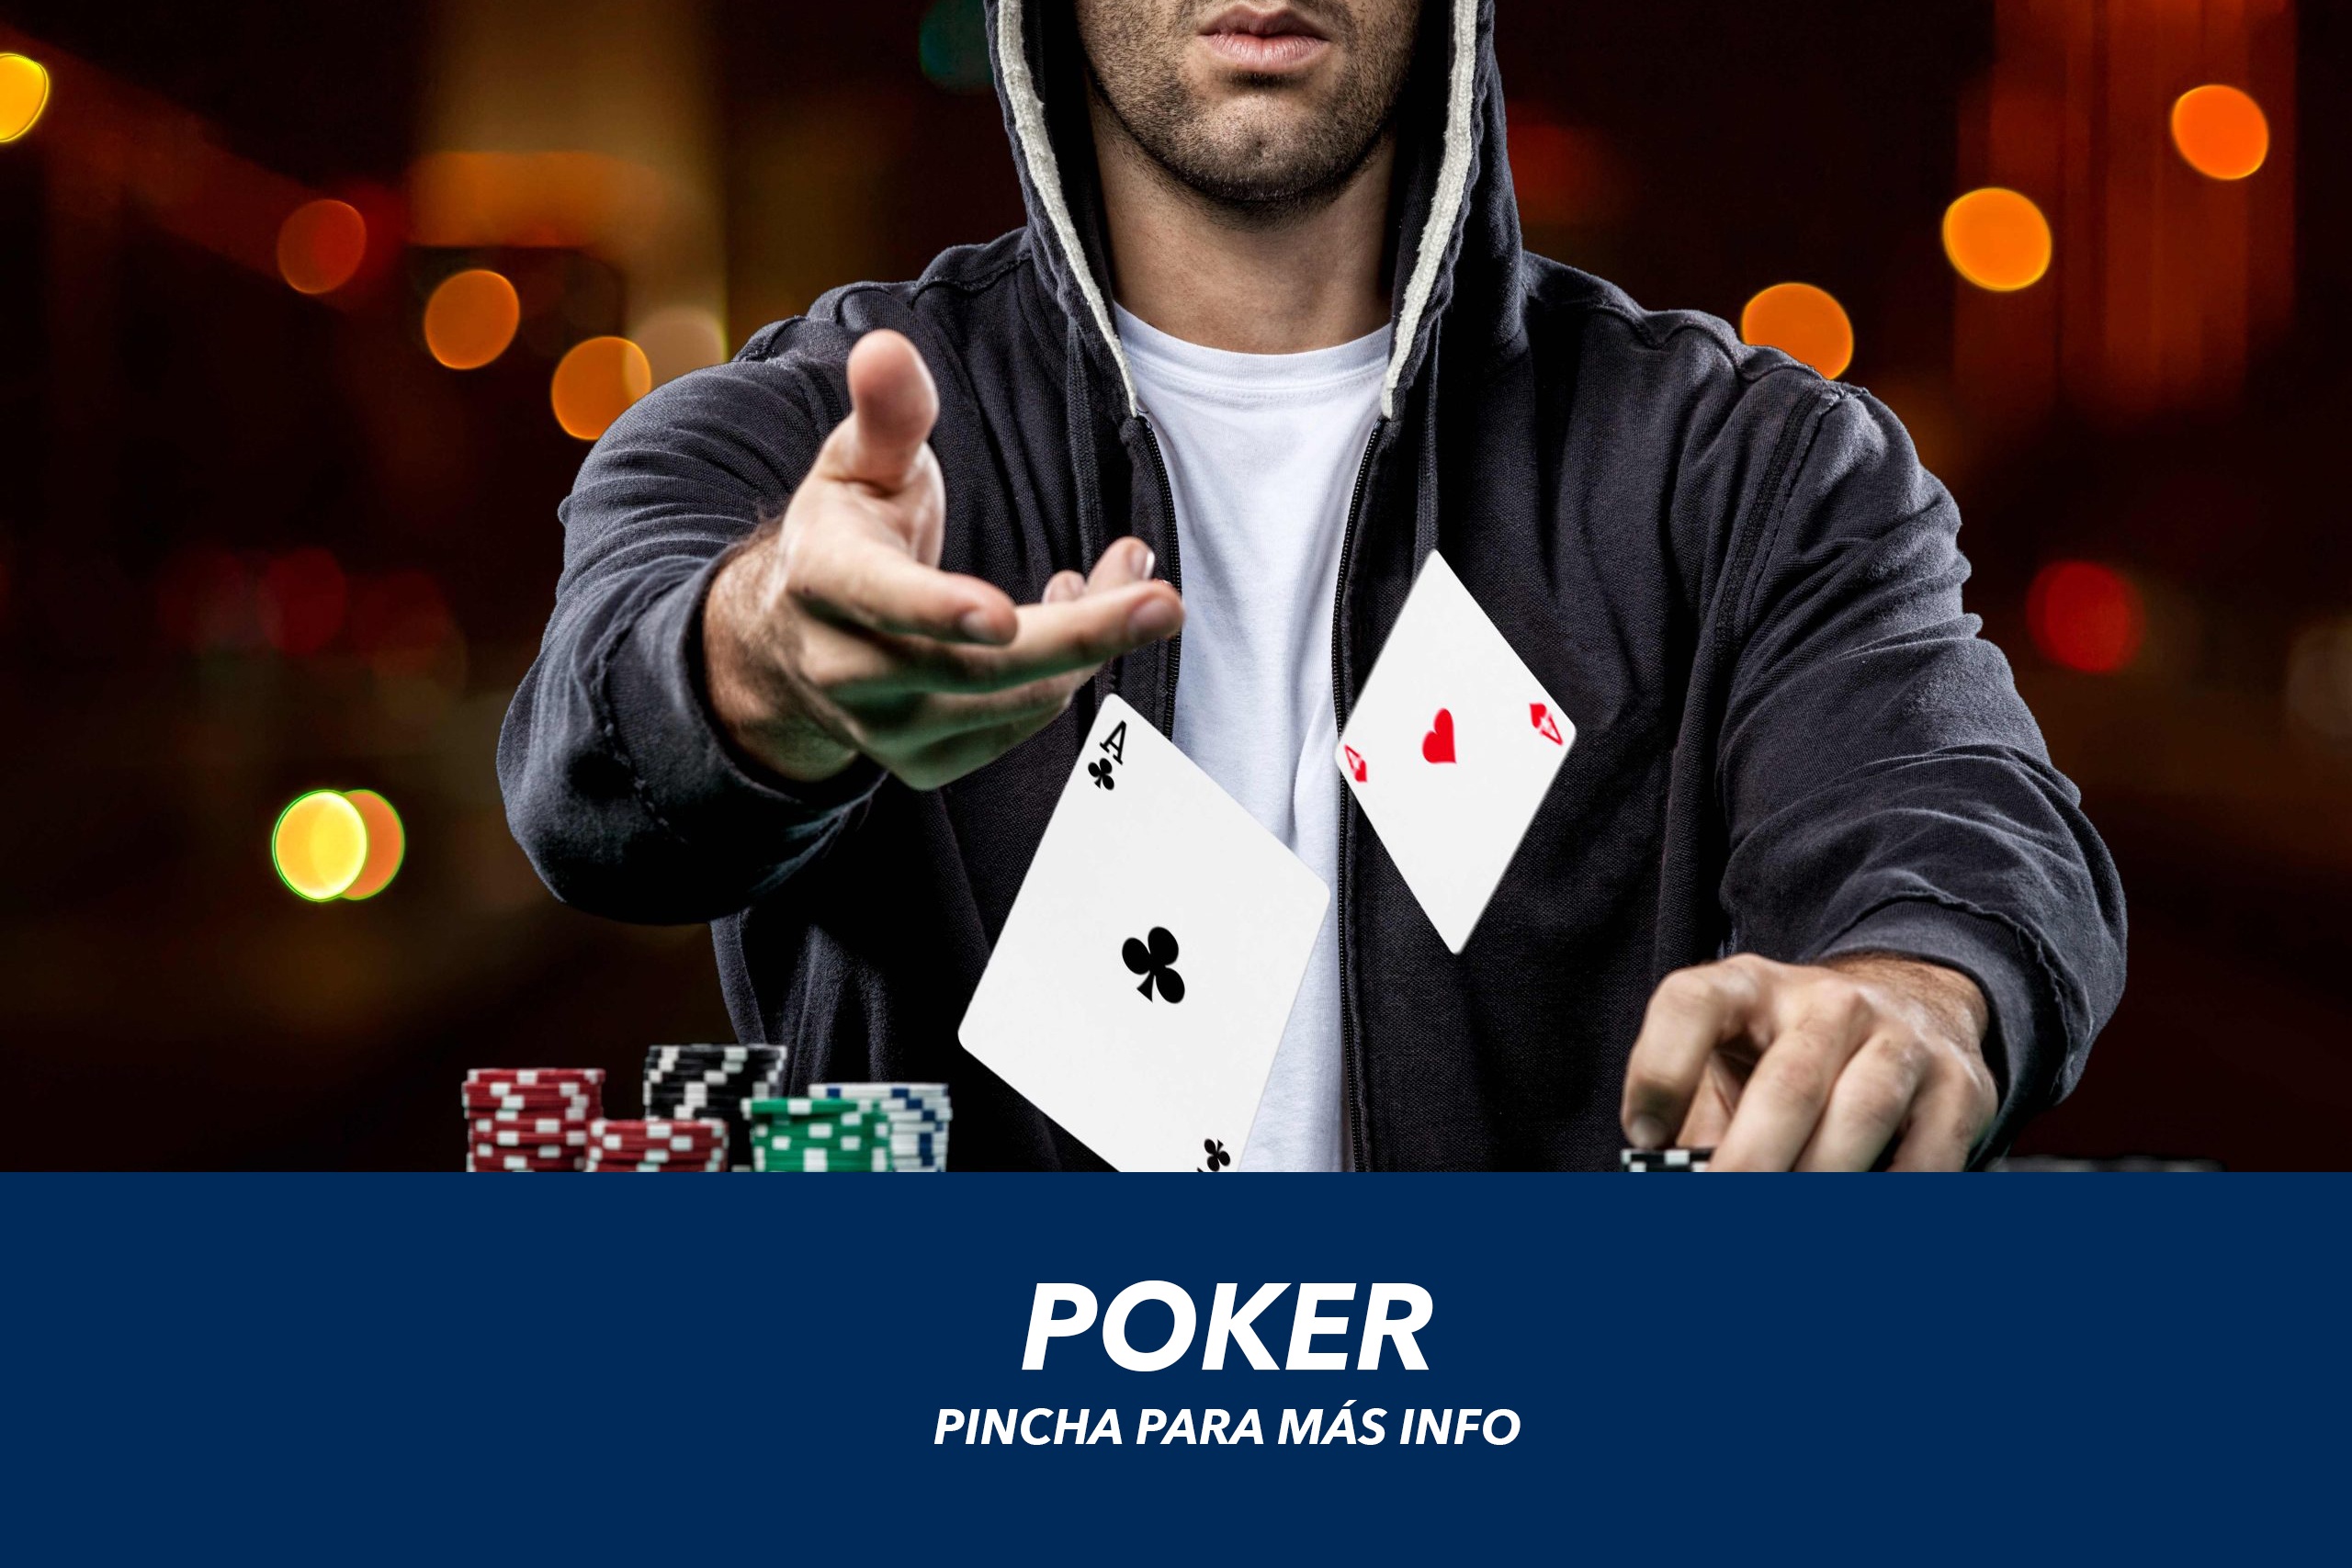 poker-player-showing-pair-of-aces-compressed-scaled copia-compressed